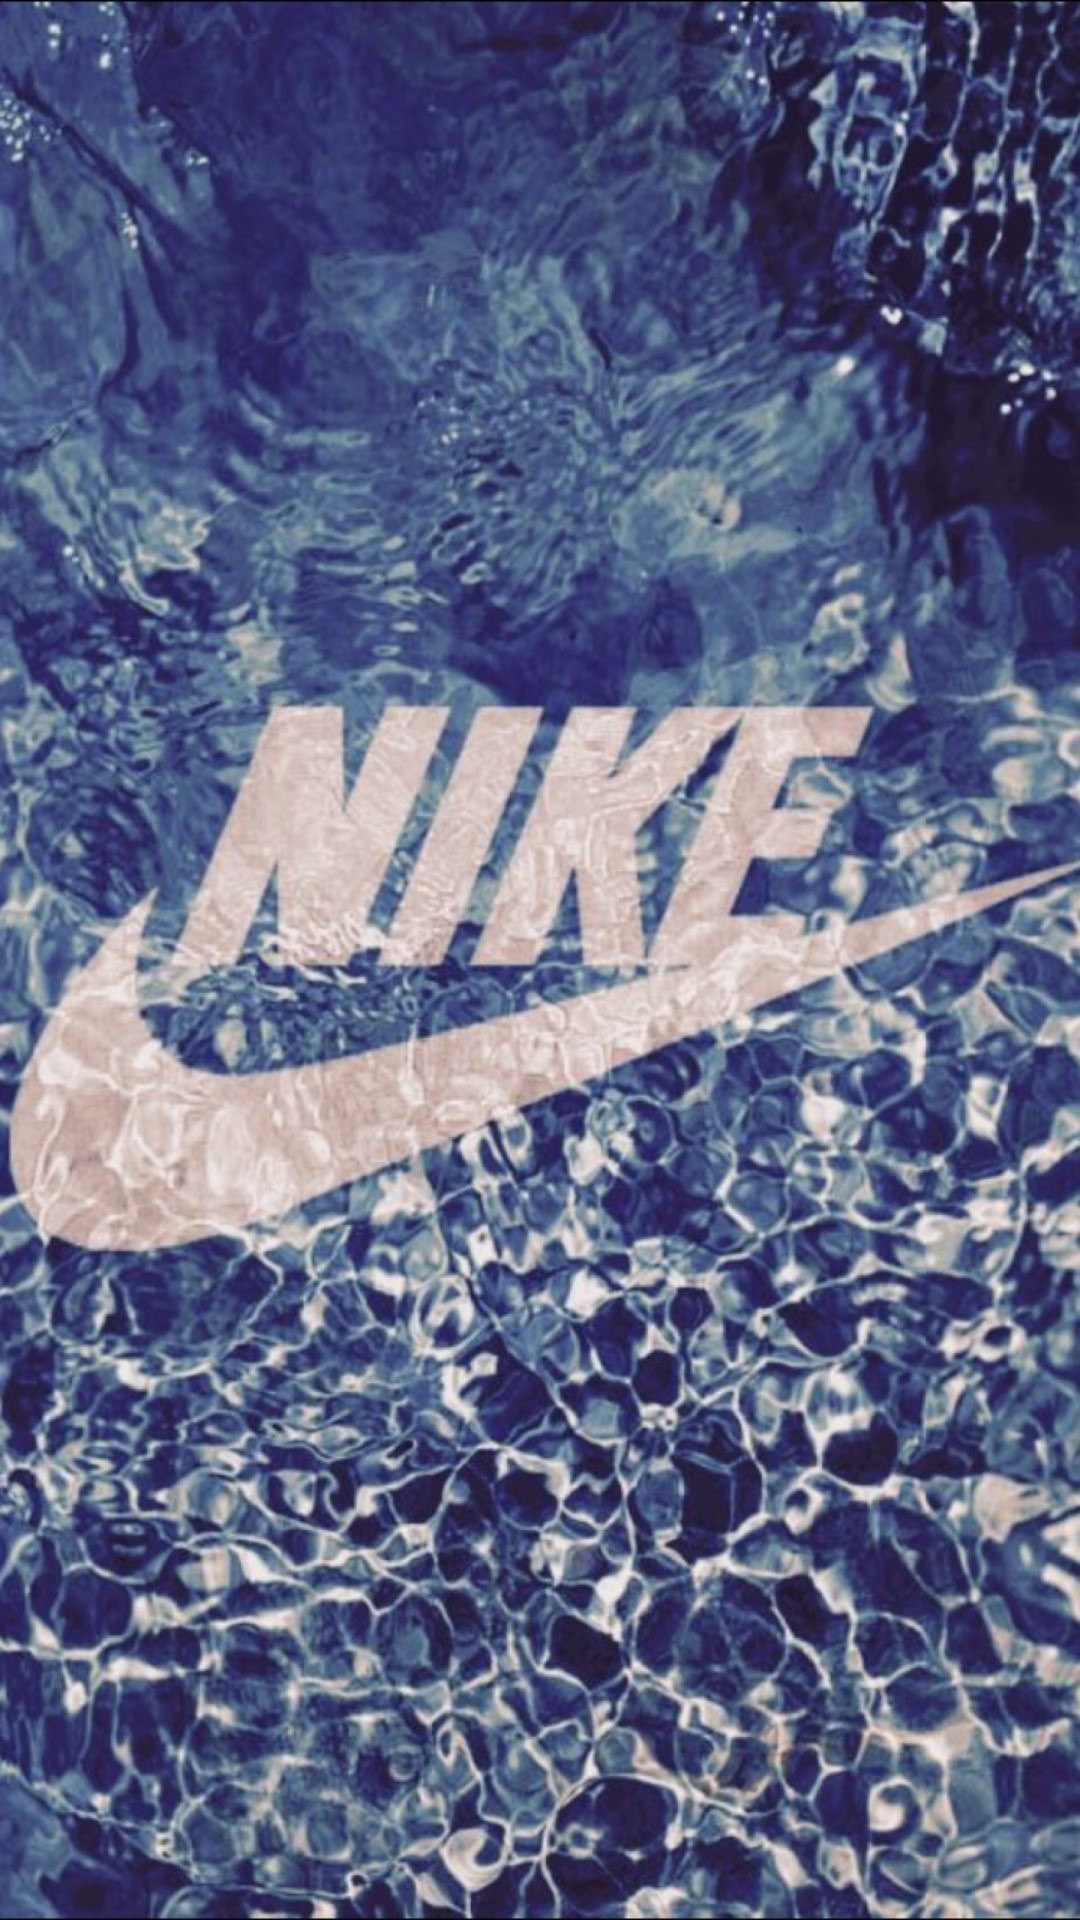 76 Nike Wallpaper For Iphone